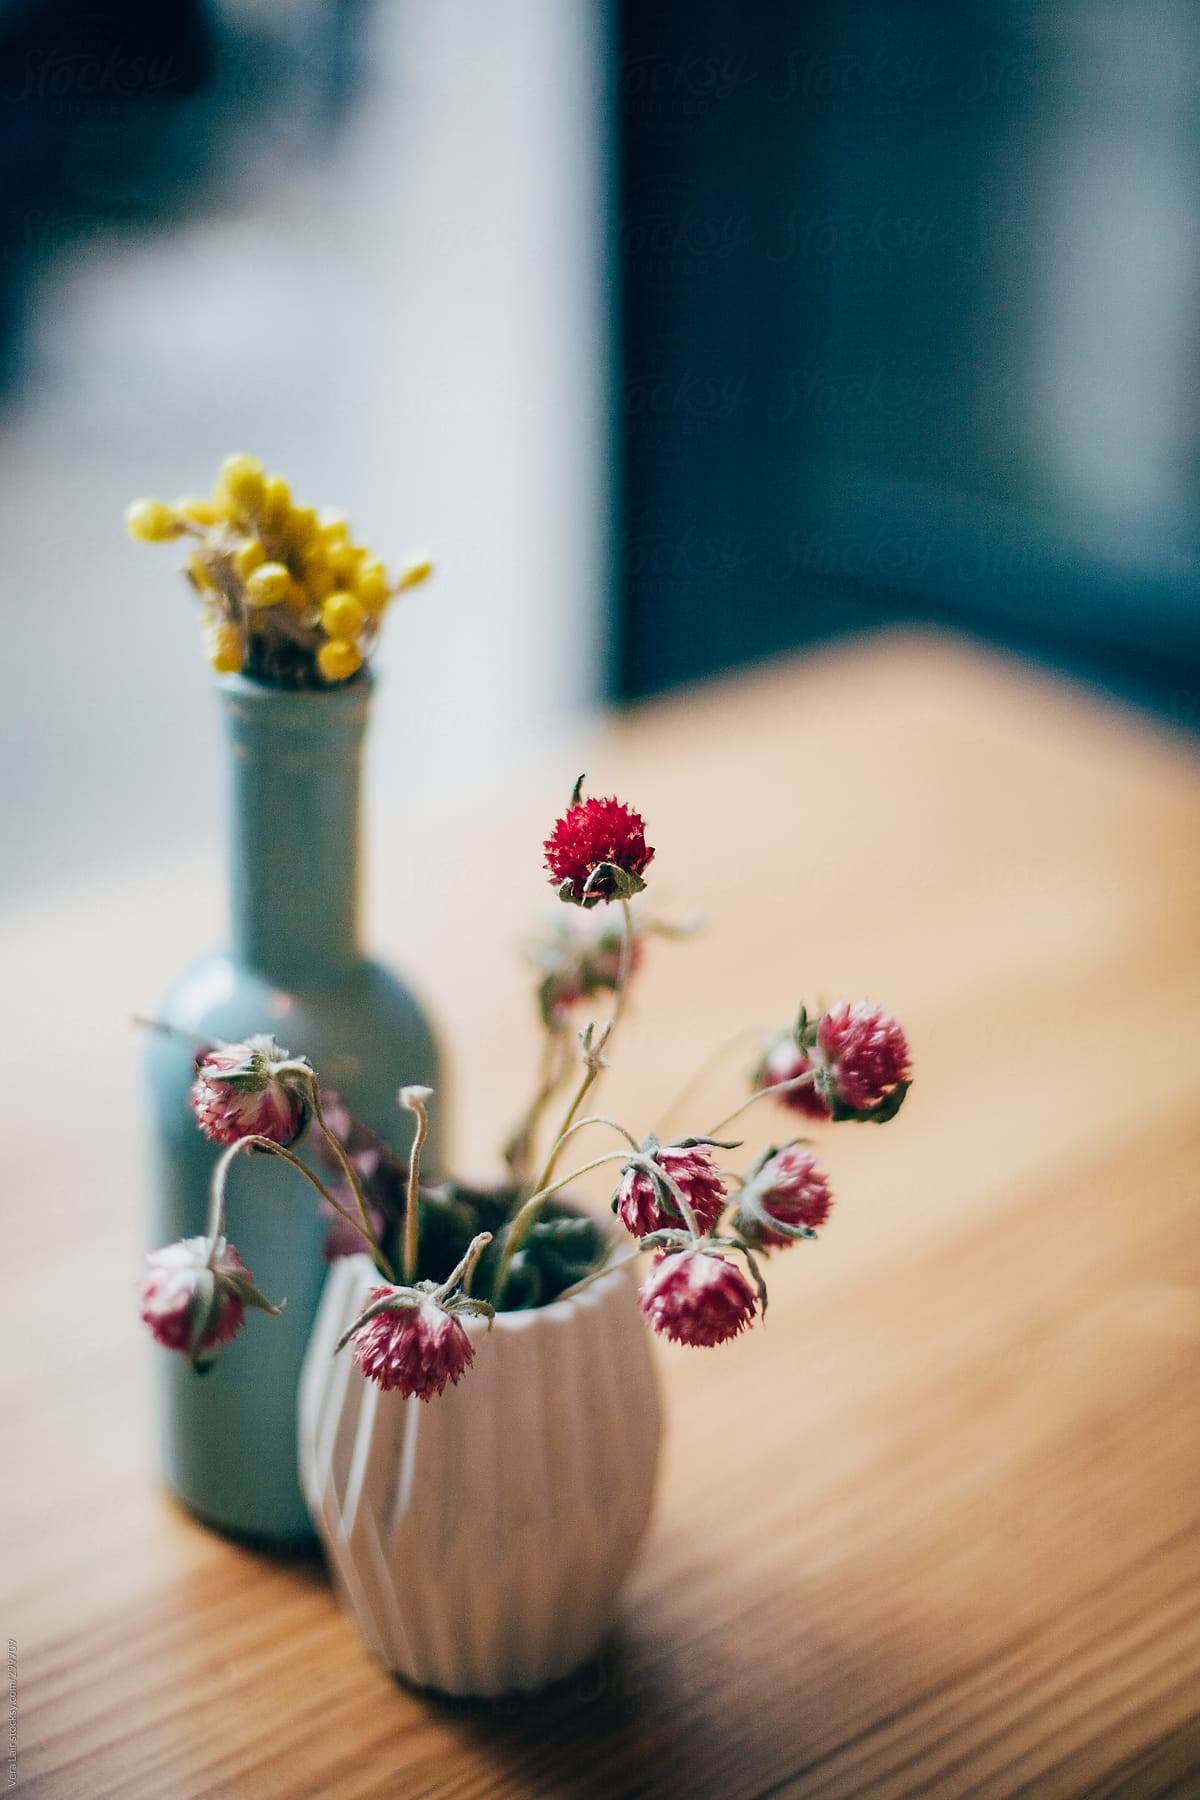 Two little vases with dried flowers